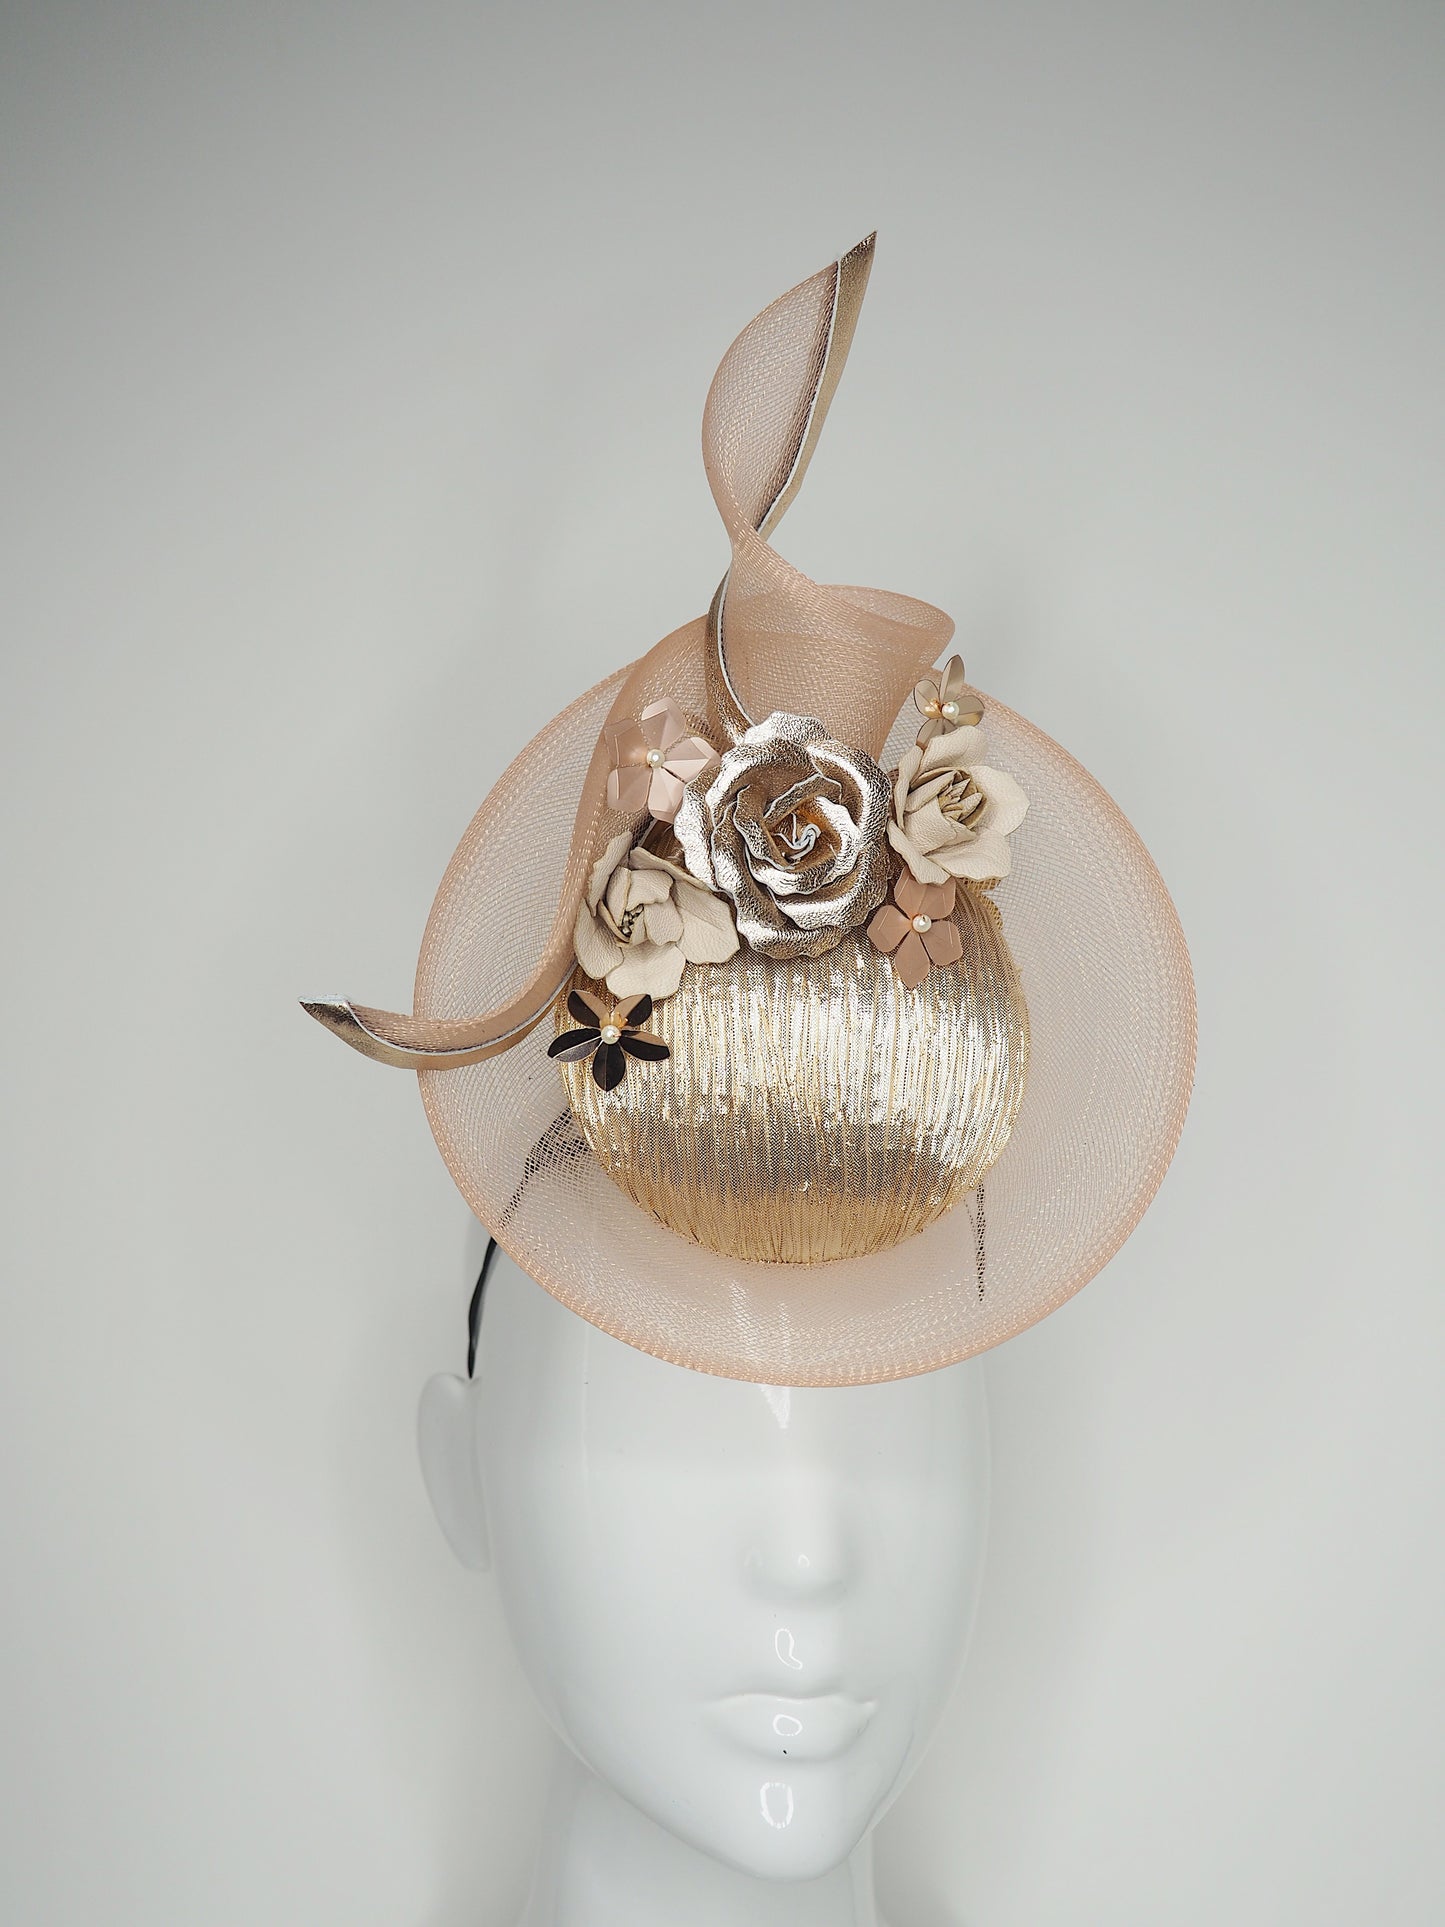 Petite Rose - Rose gold percher with nude crinoline swirl and flower detailing